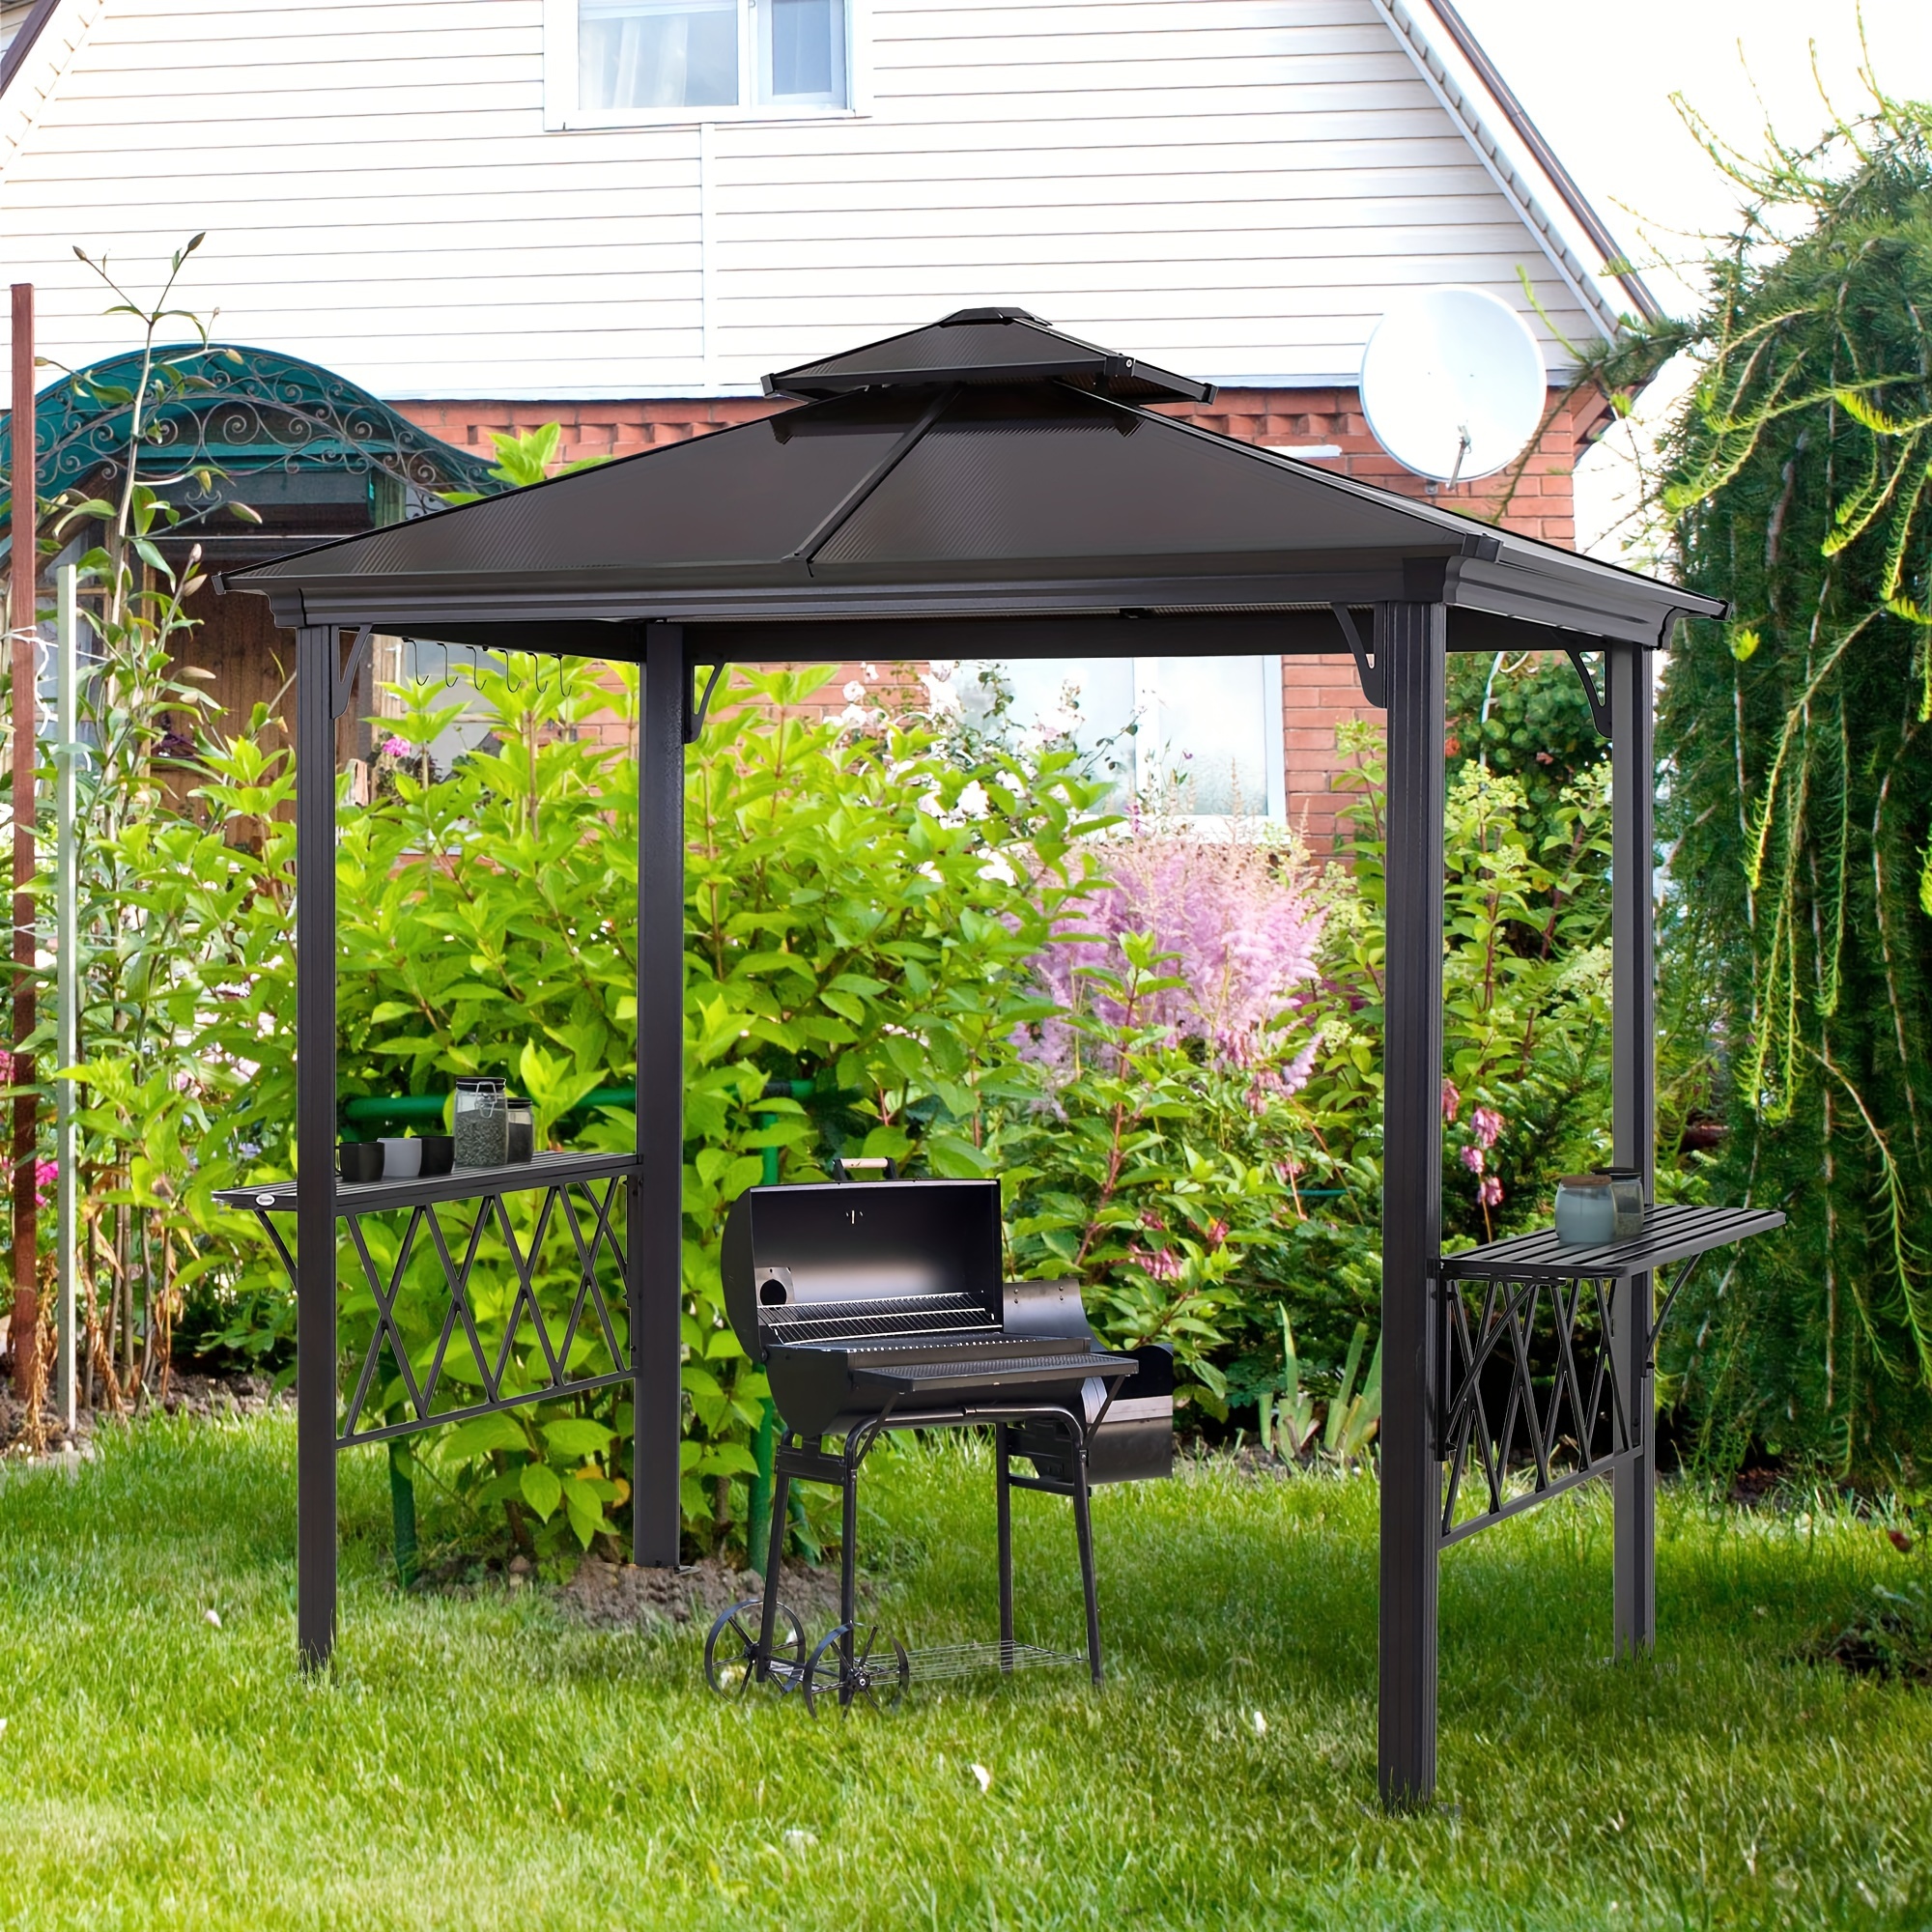 

9' X 5' Grill Gazebo, Bbq Gazebo Canopy With 2-tier Polycarbonate Roof, Shelves Serving Tables And Hooks, For Backyard Patio Lawn